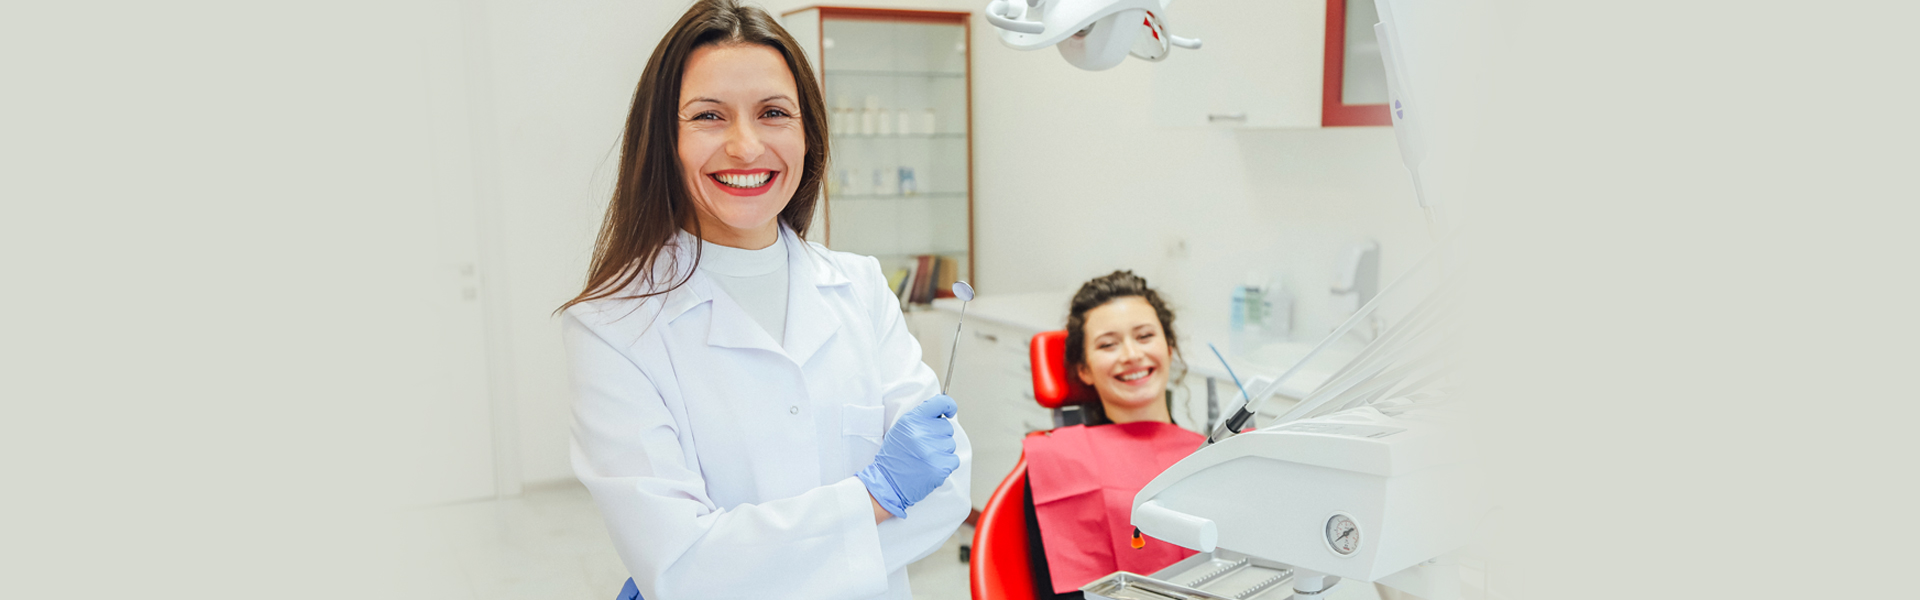 How Long Should Dental Crowns Hurt After Treatment?